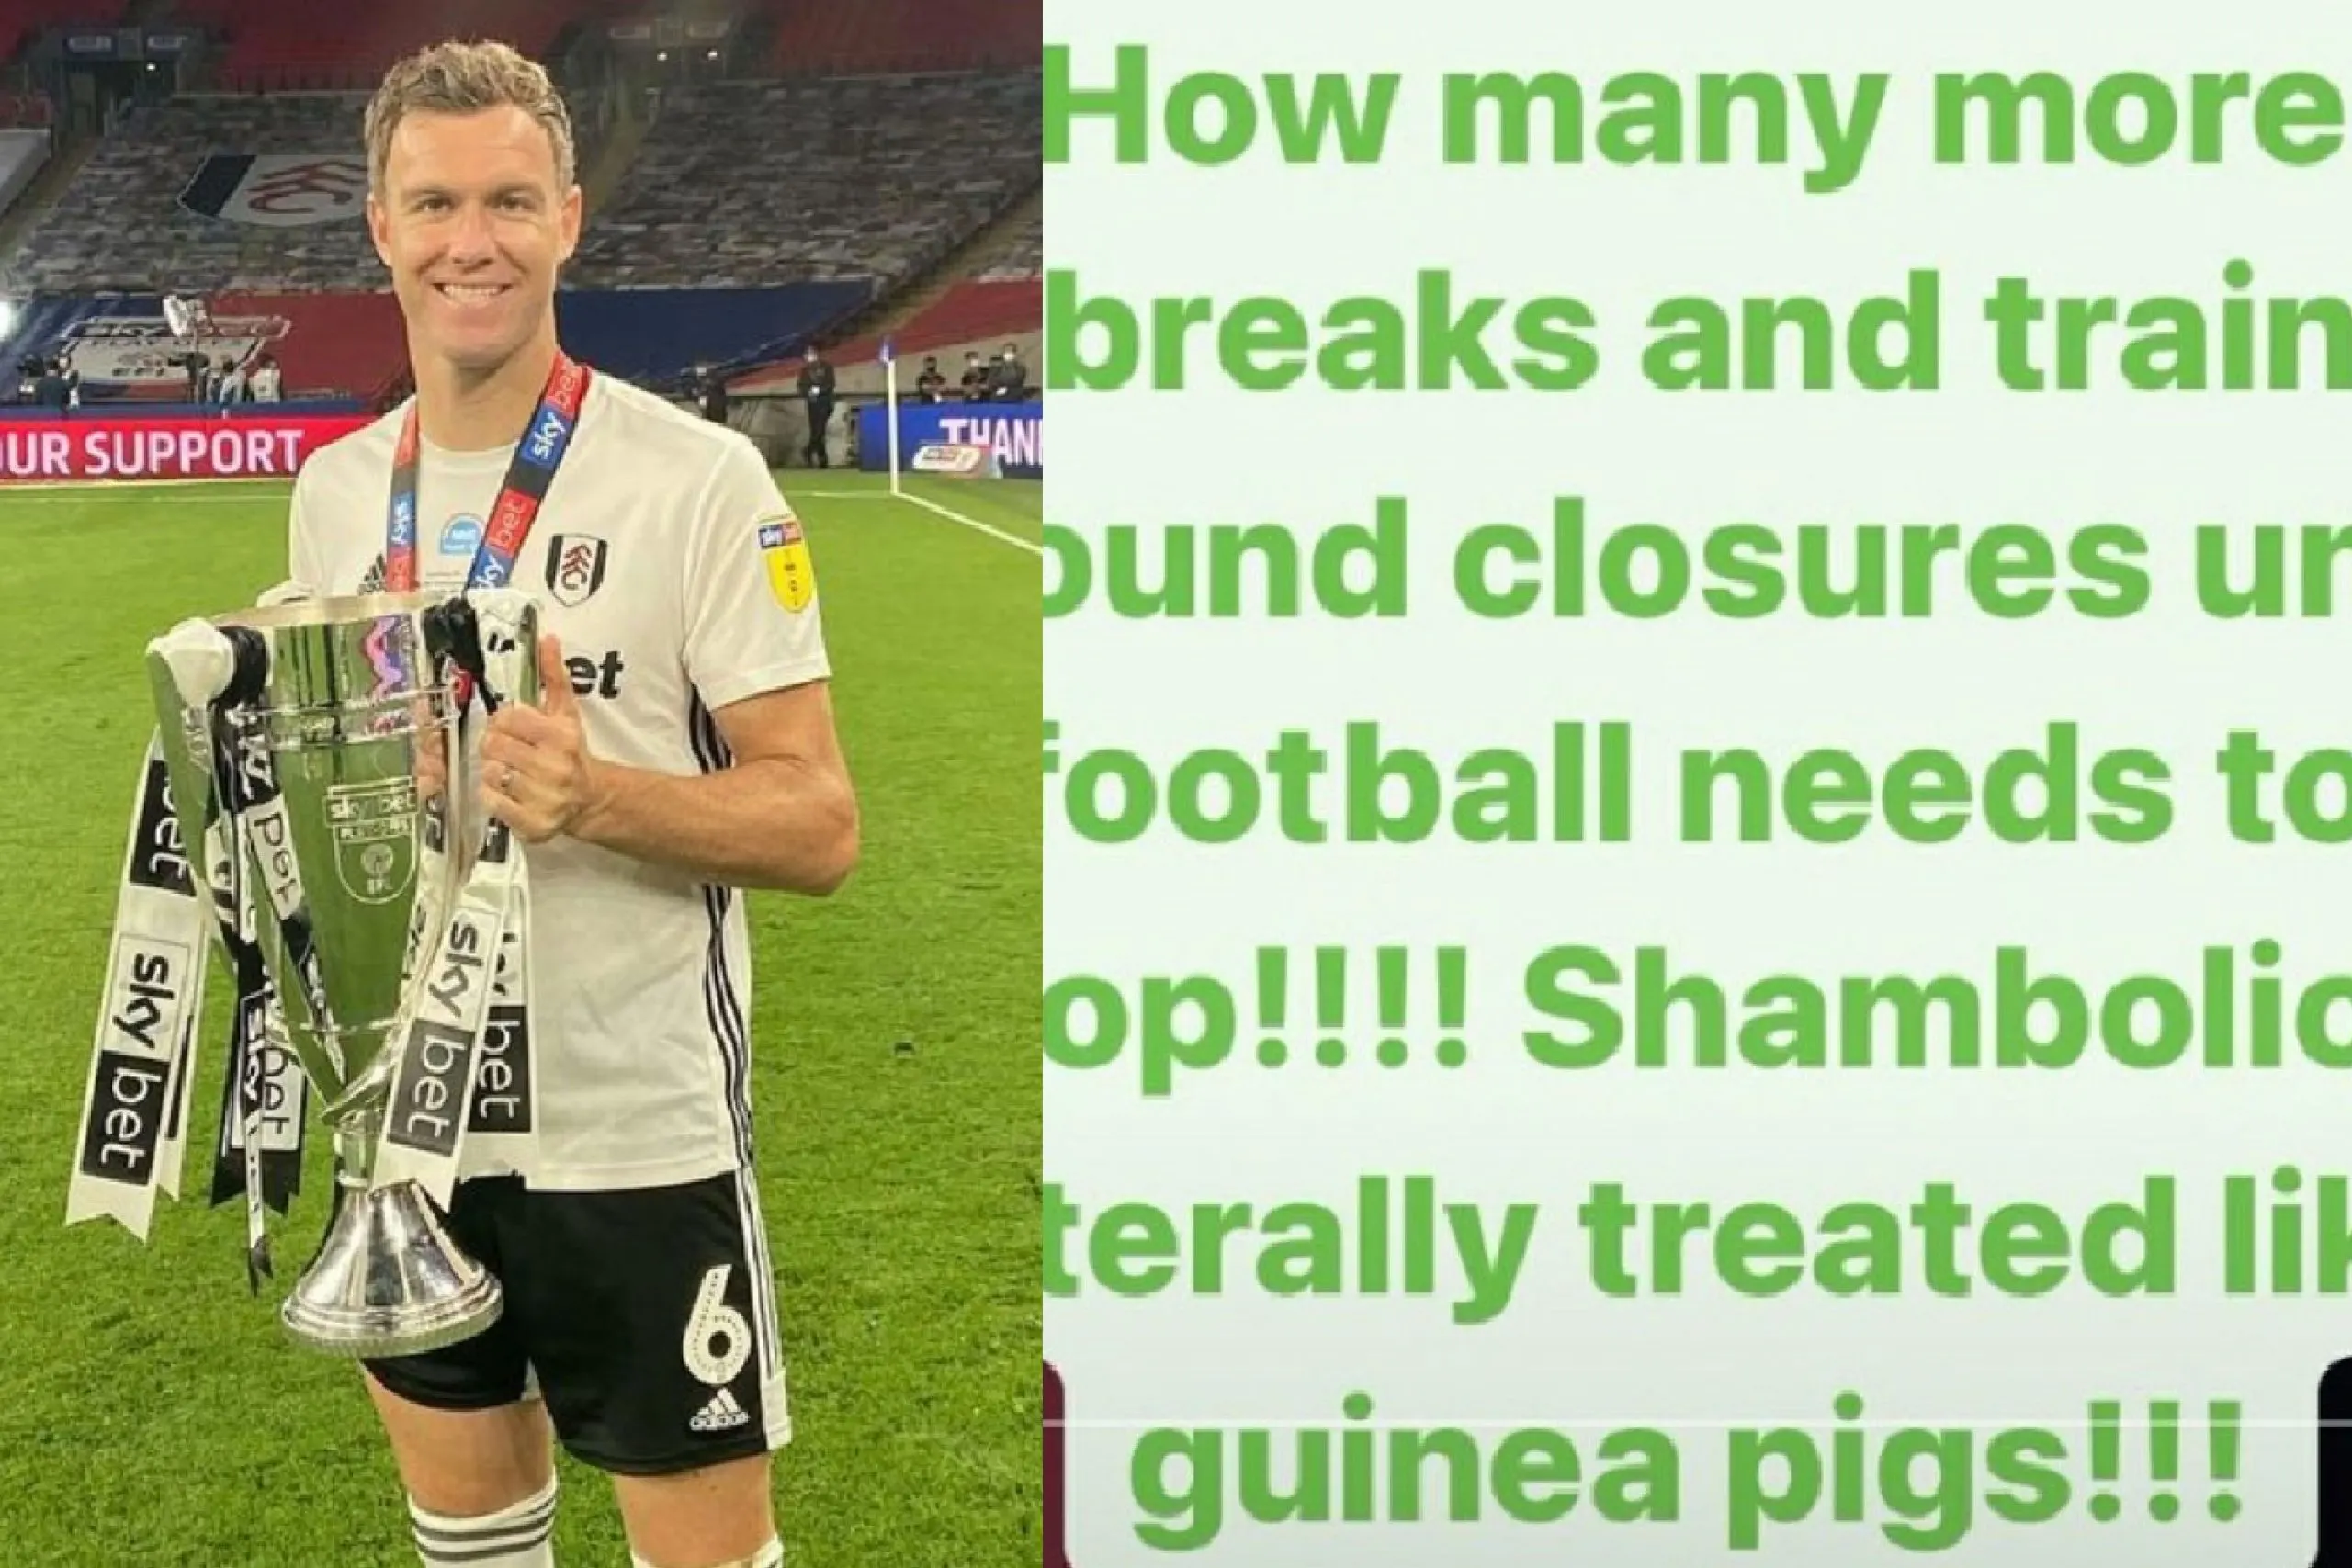 Kevin McDonald calls out the govt. for treating footballers like 'guinea pigs' amid Covid surge